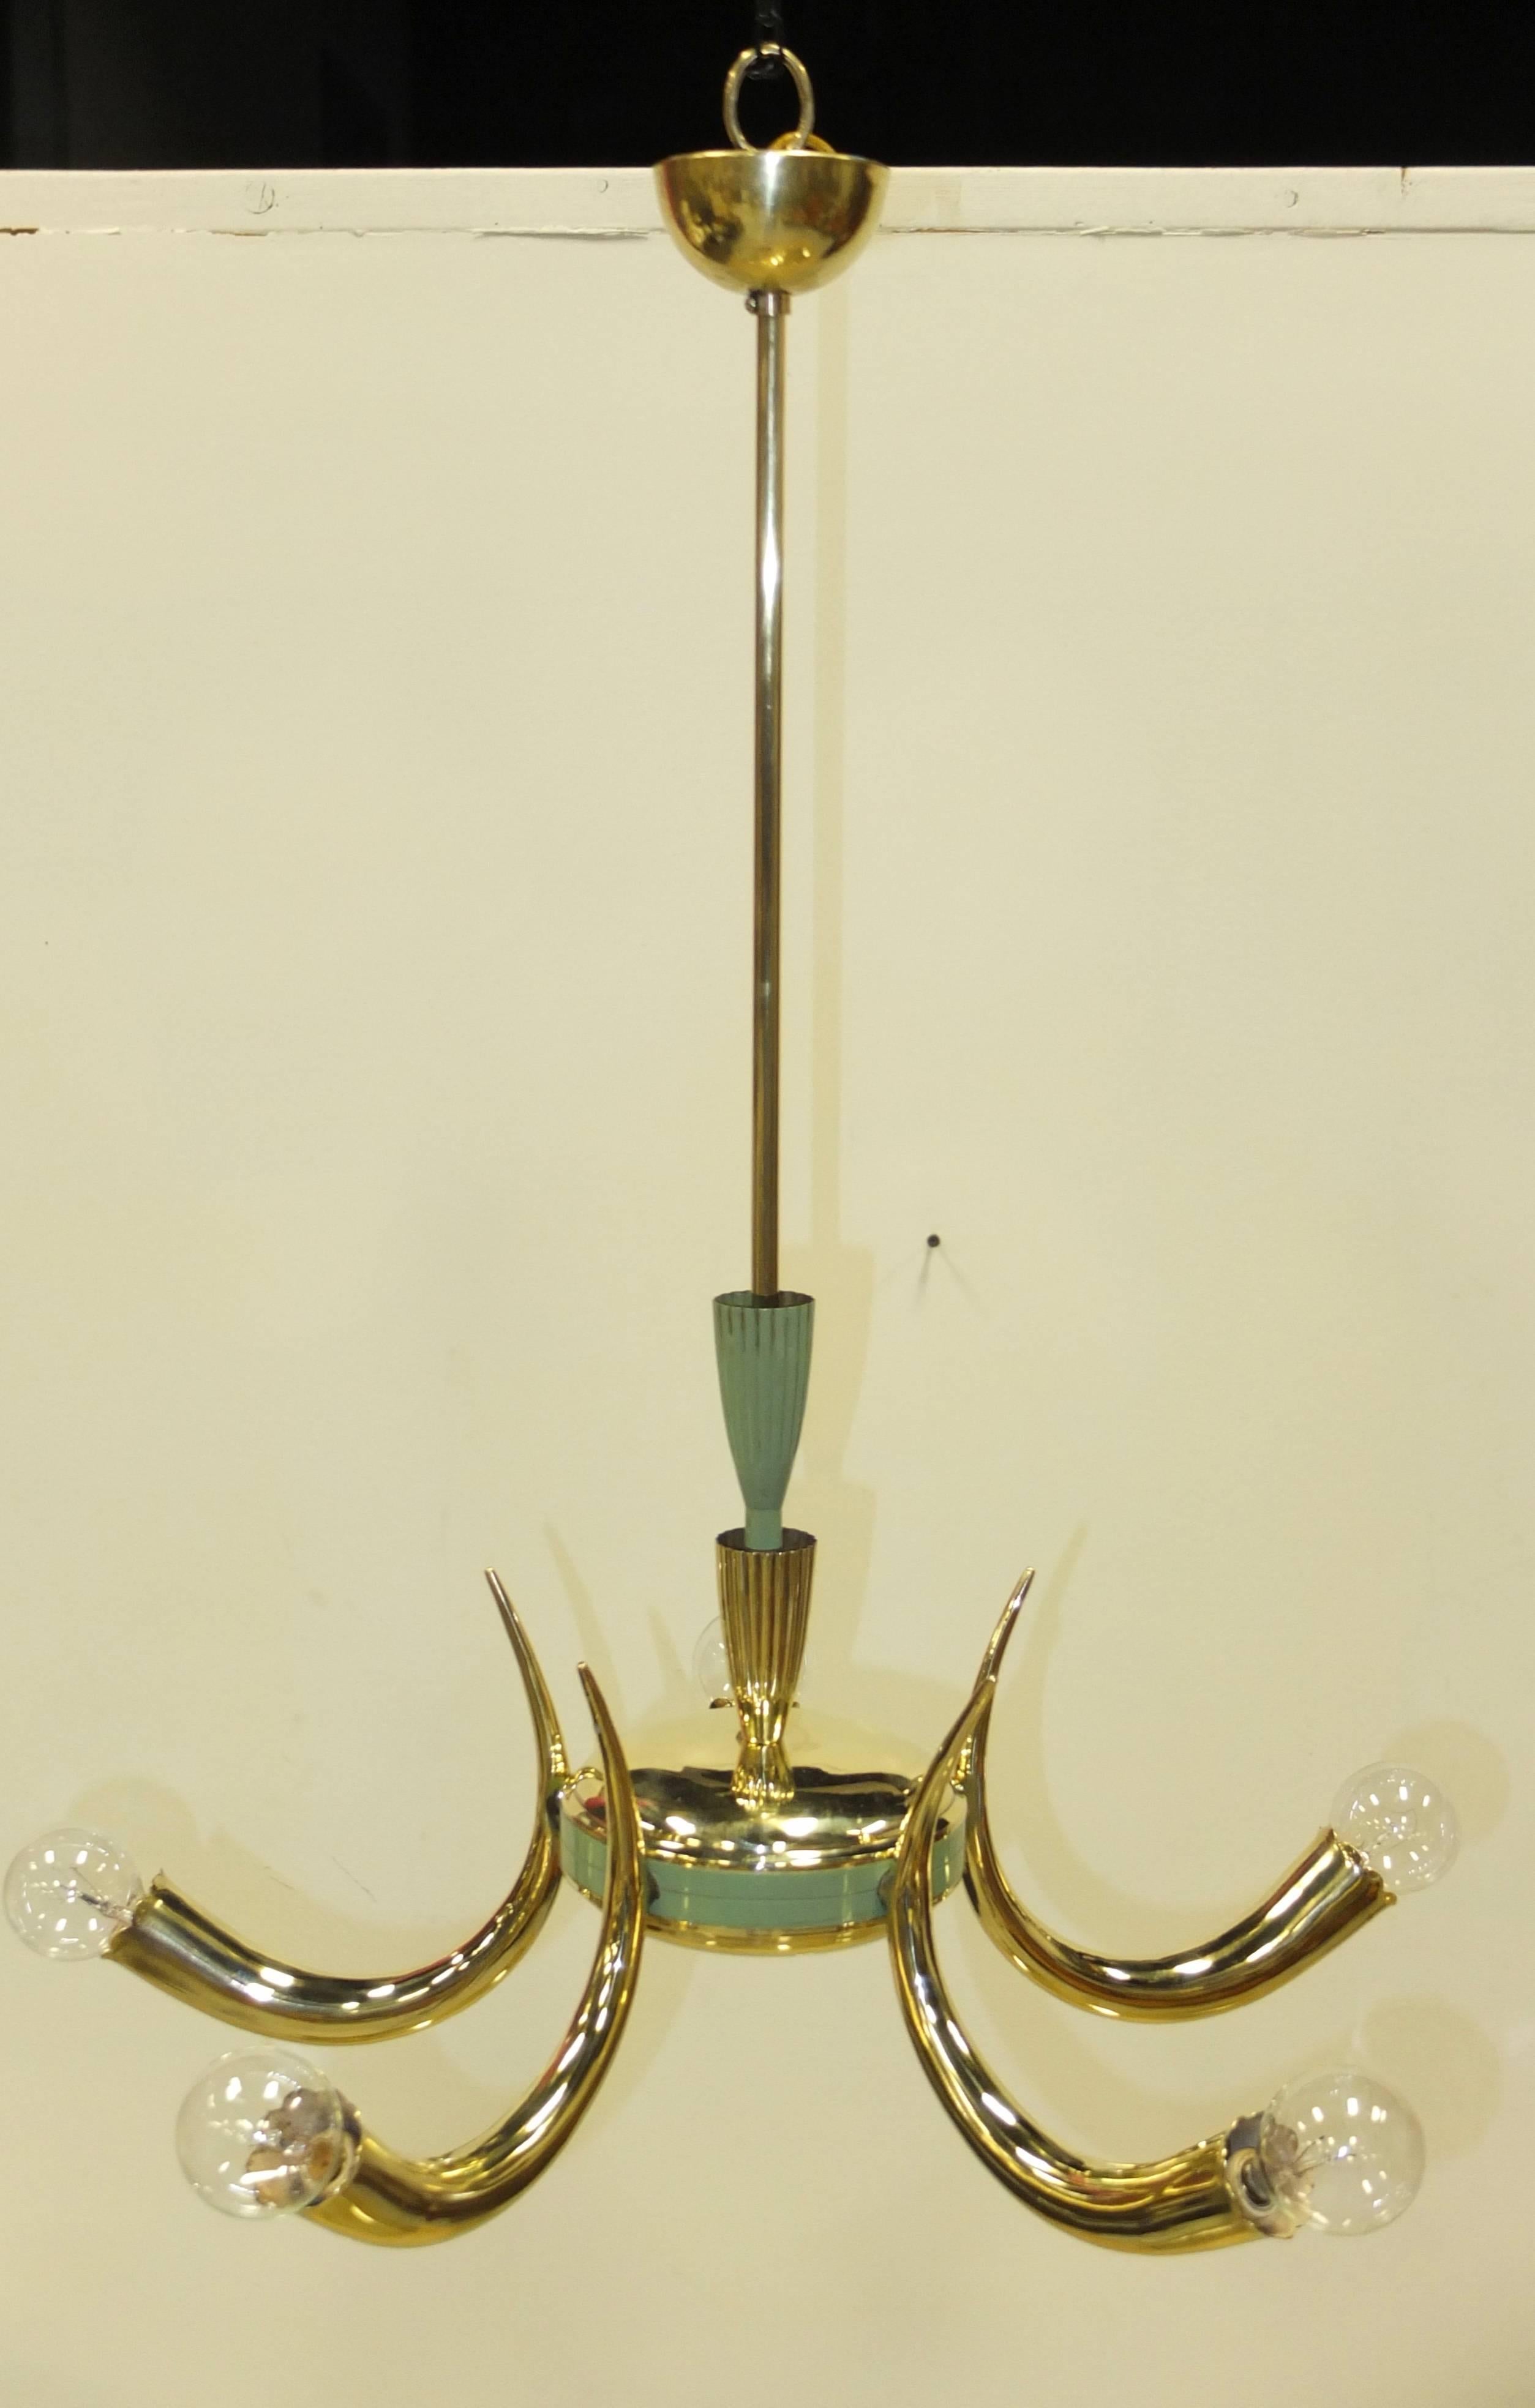 Superbly crafted 'Horn of plenty' sconces with five curved brass horns with slightly scalloped edges around a solid brass cluster body enameled in seafoam green (can be changed or removed to show only brass). Stem is embellished with two flutedtulip